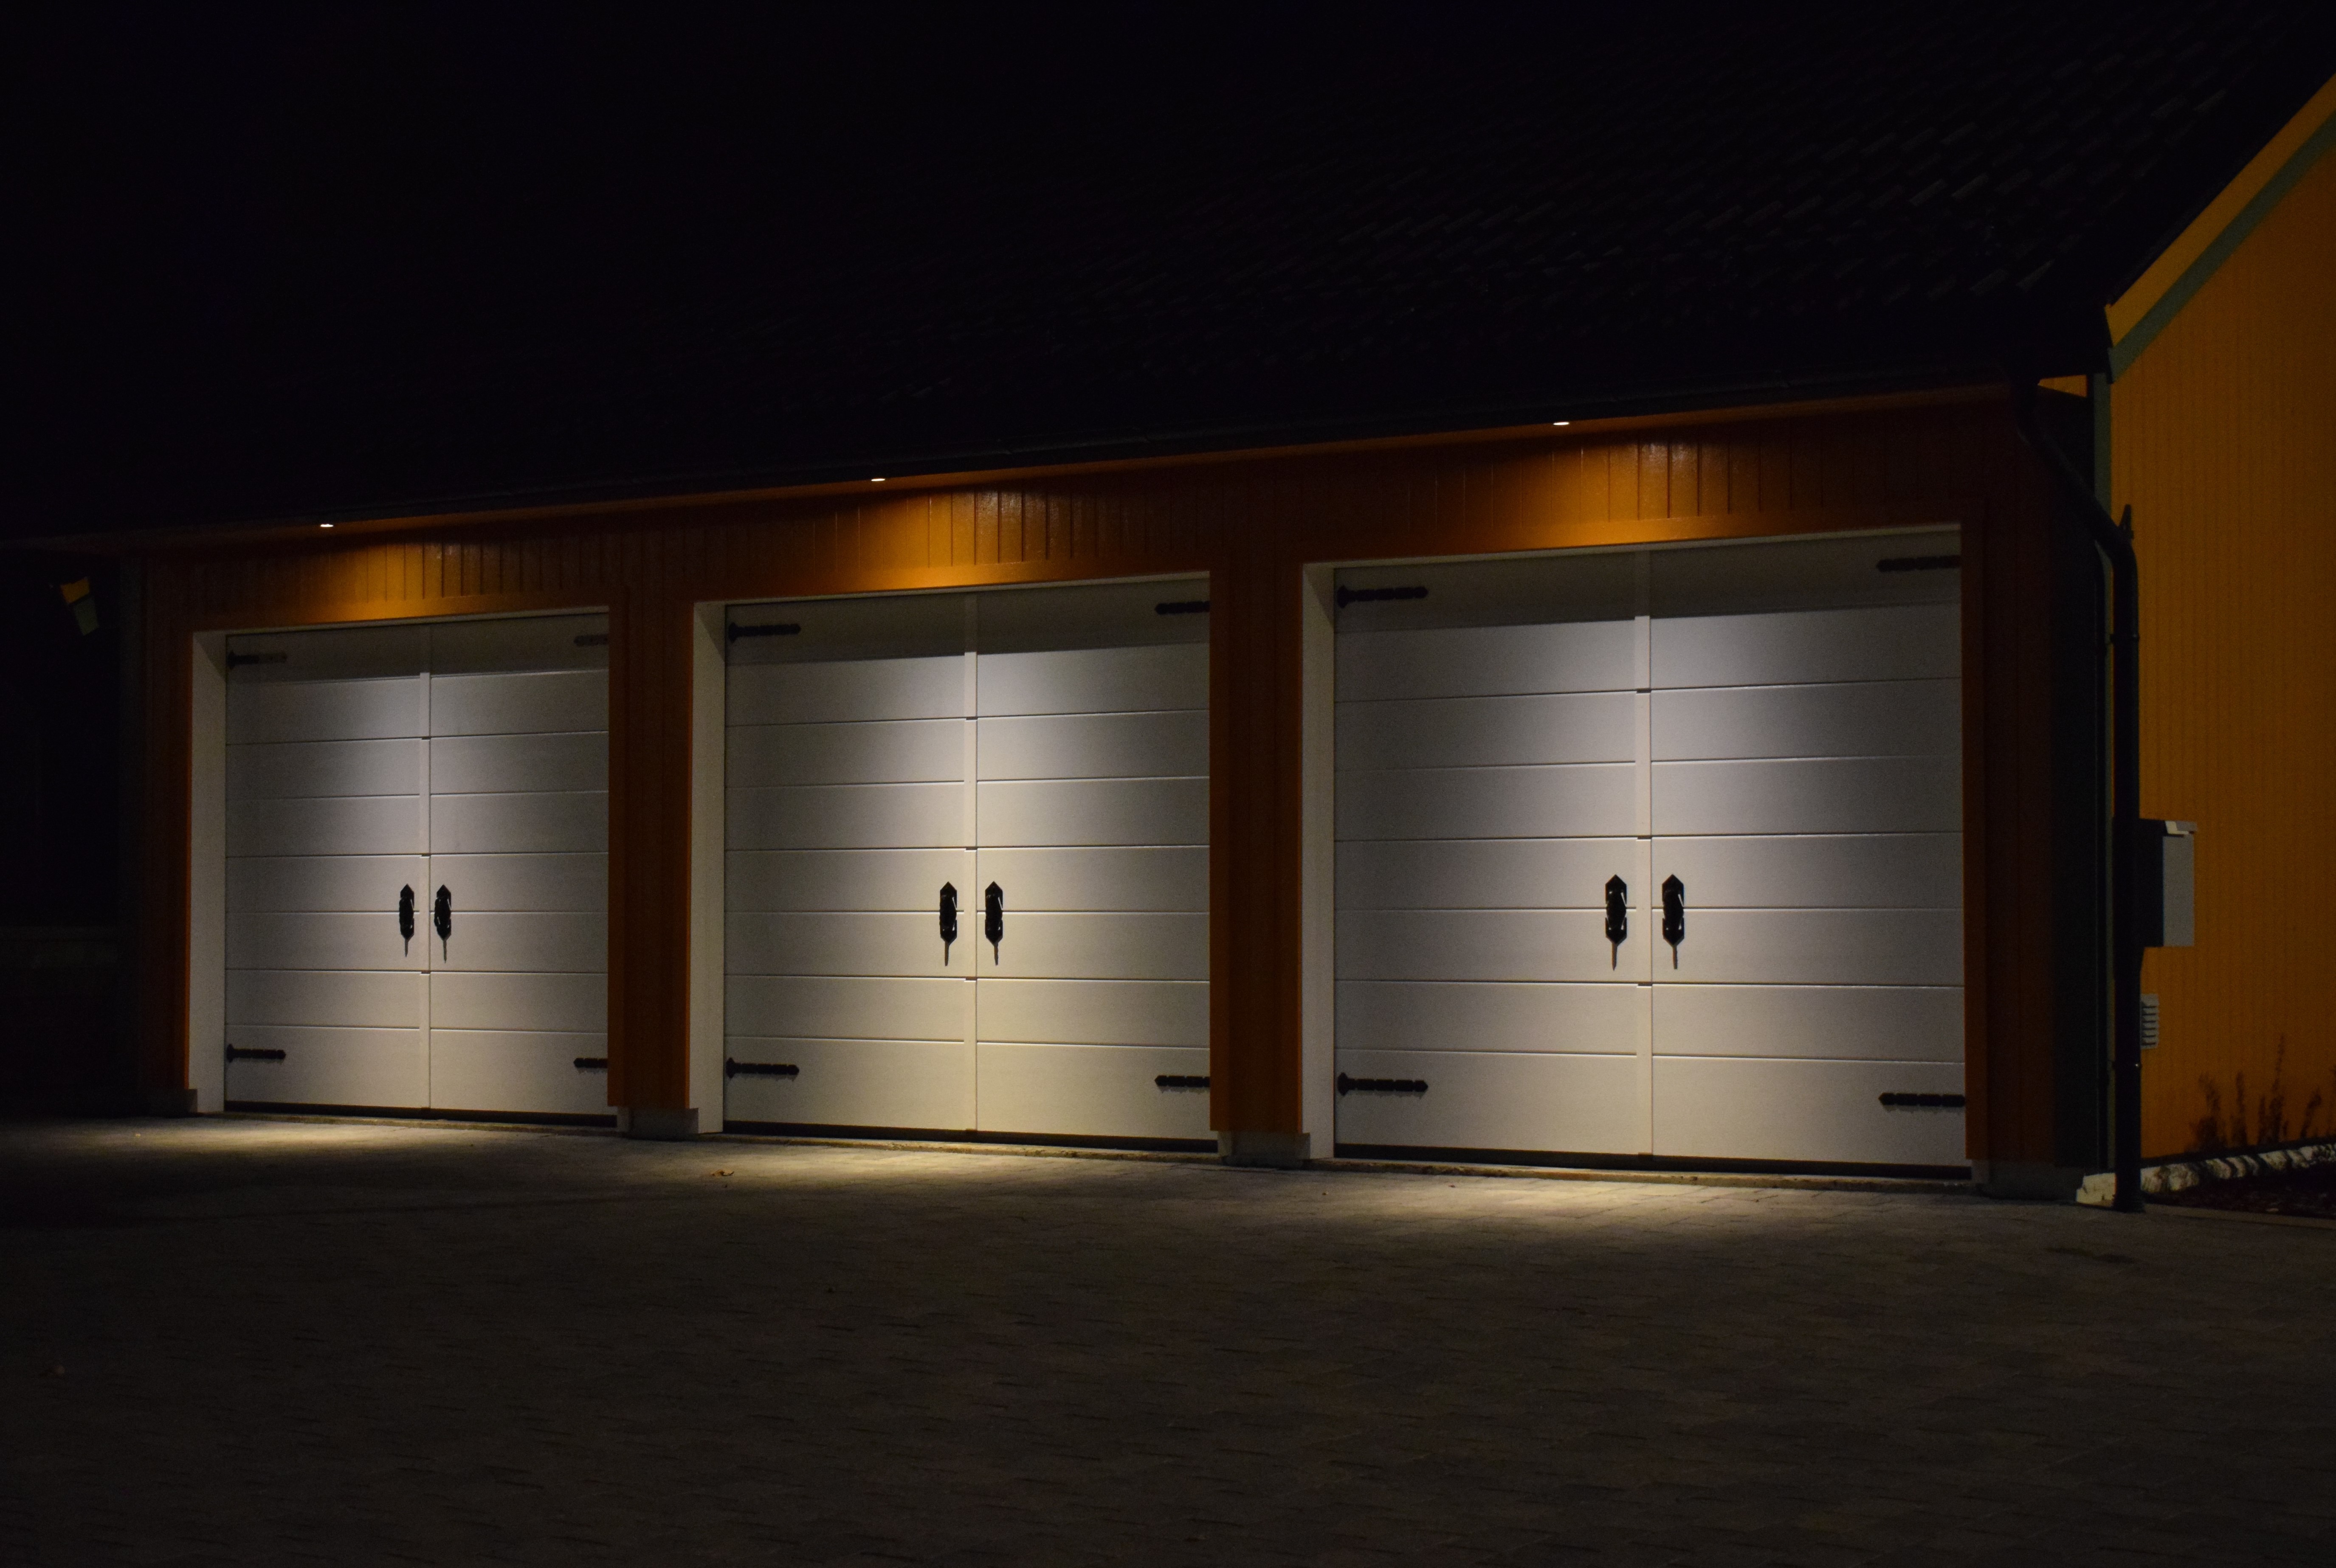 How to Choose Lights for a Garage Exterior?